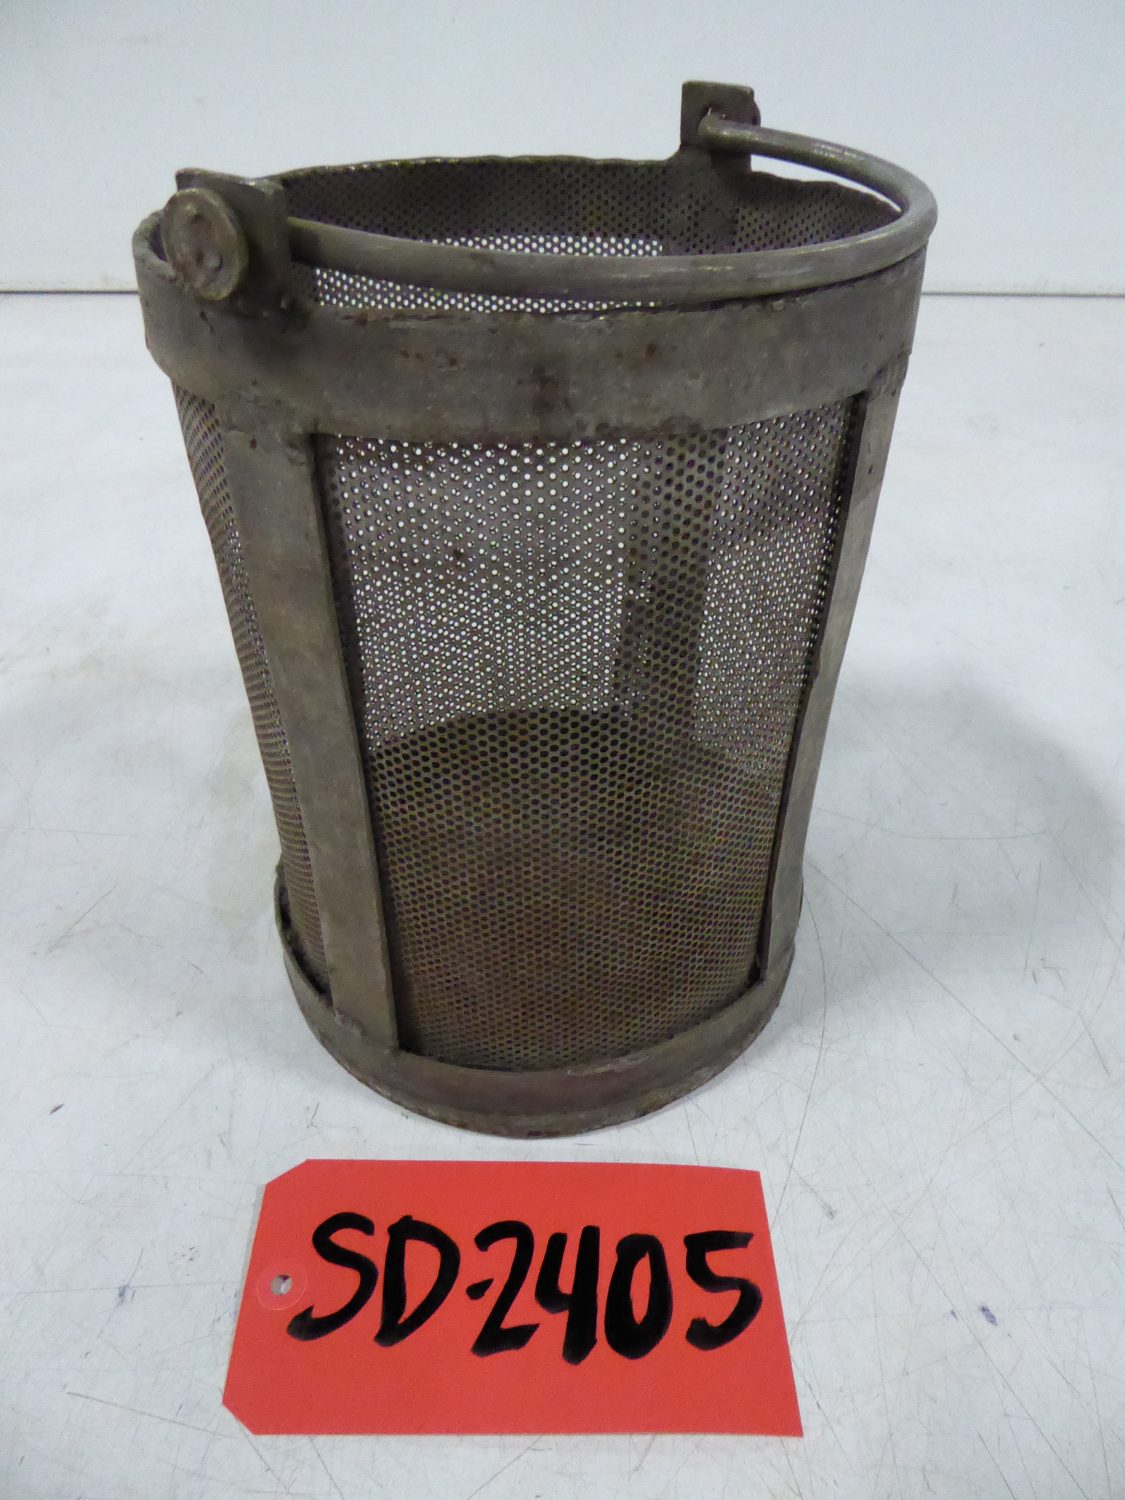 Used Spin Dryer - 8" x 10" Spin Dryer Basket SD2405-Spin Dryers